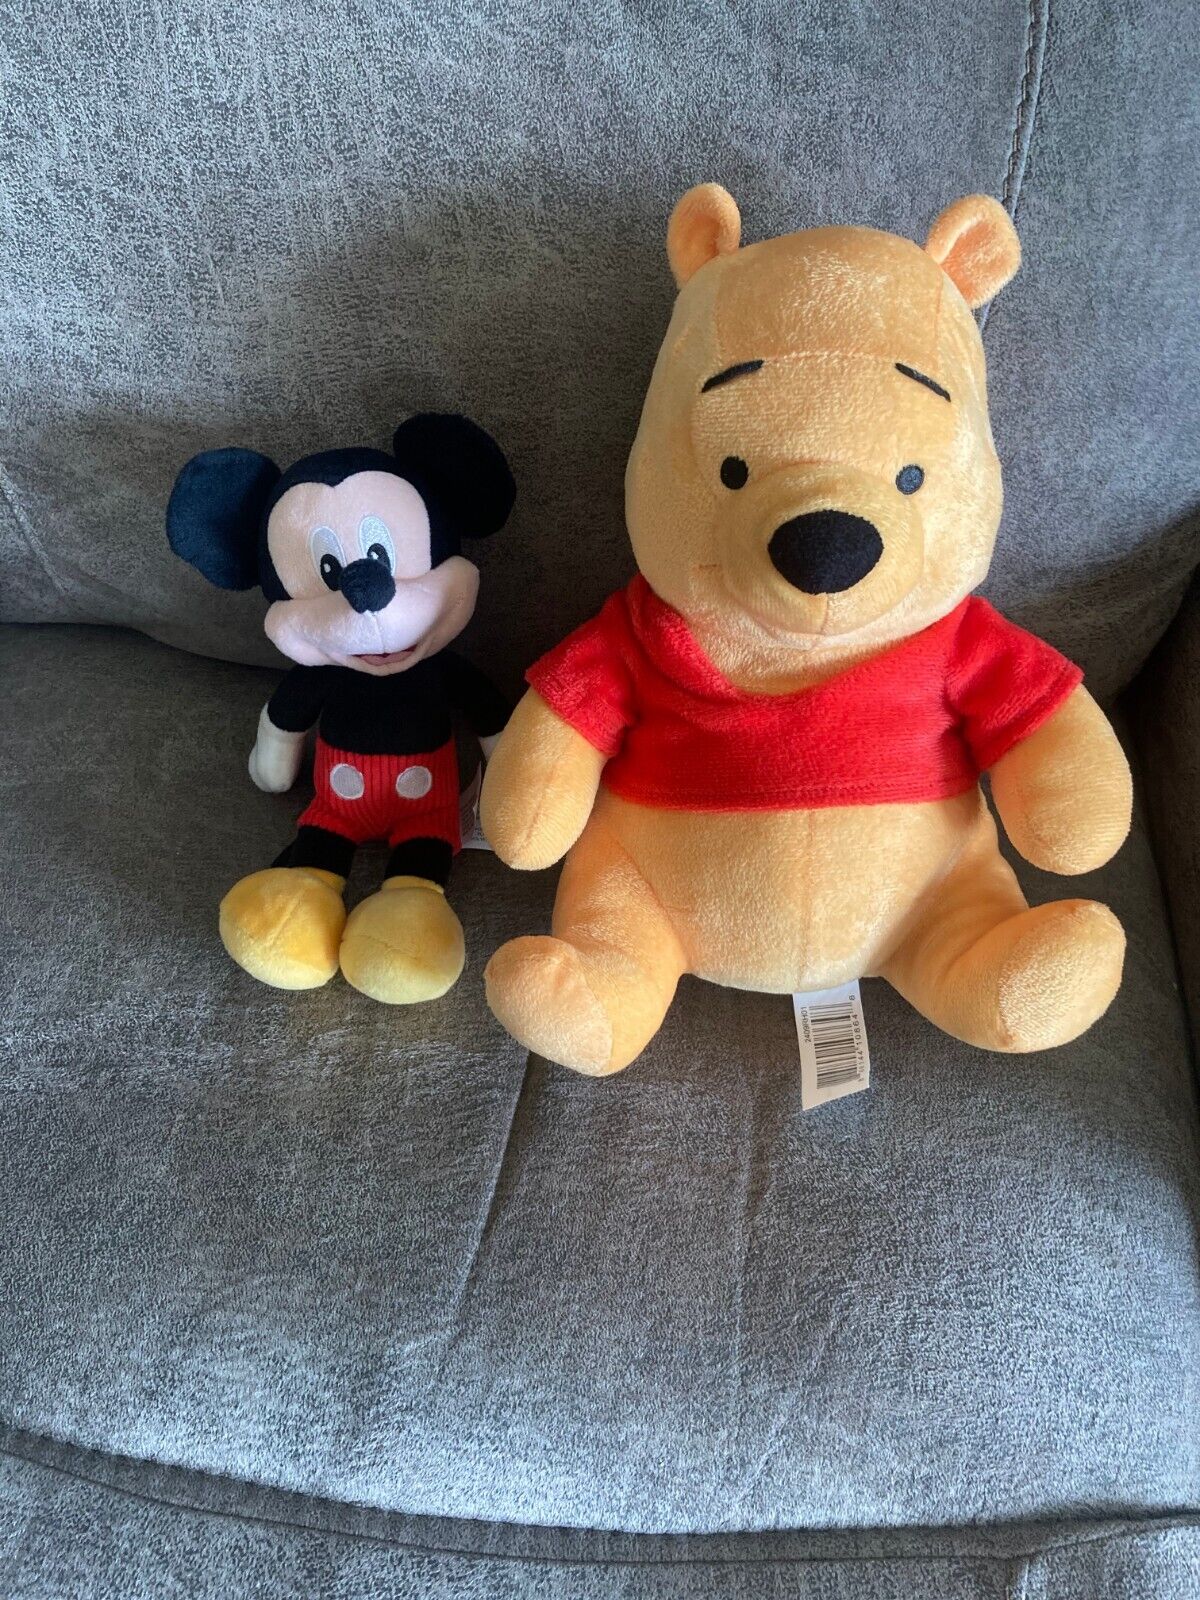 Disney Winnie the Pooh and Mickey Mouse Plush Pair - Authentic